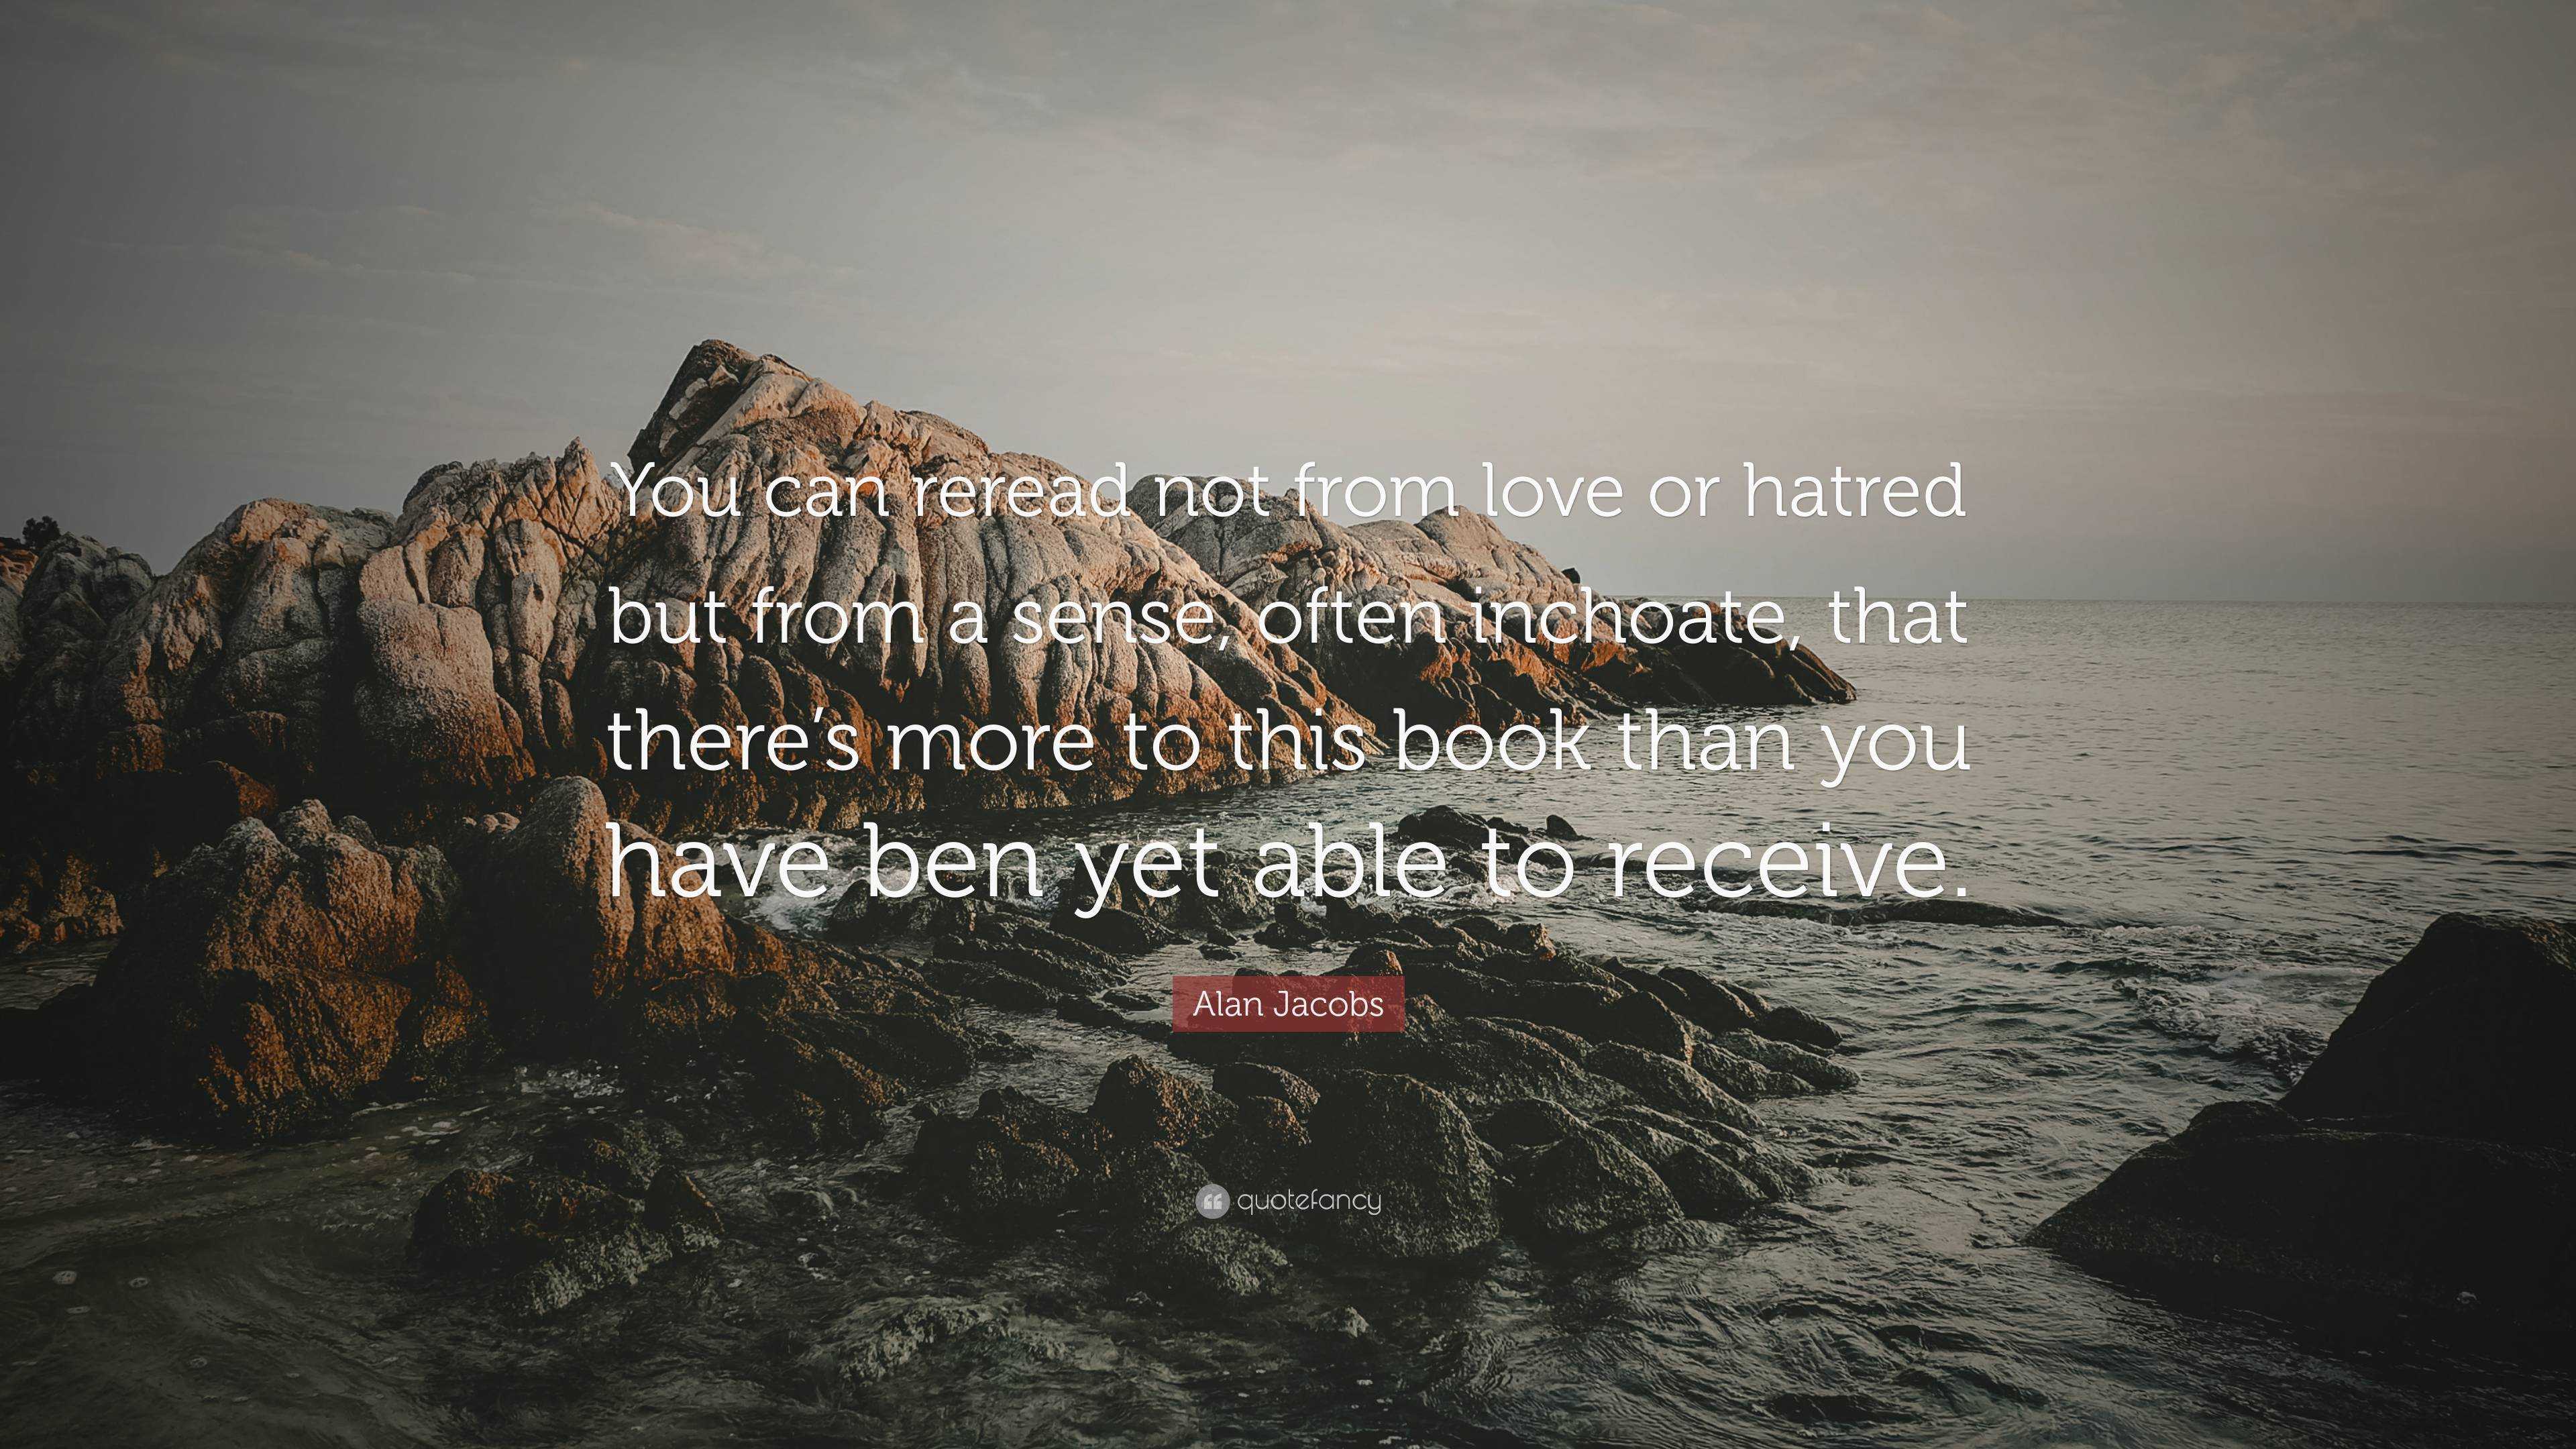 Alan Jacobs Quote: “You can reread not from love or hatred but from a ...